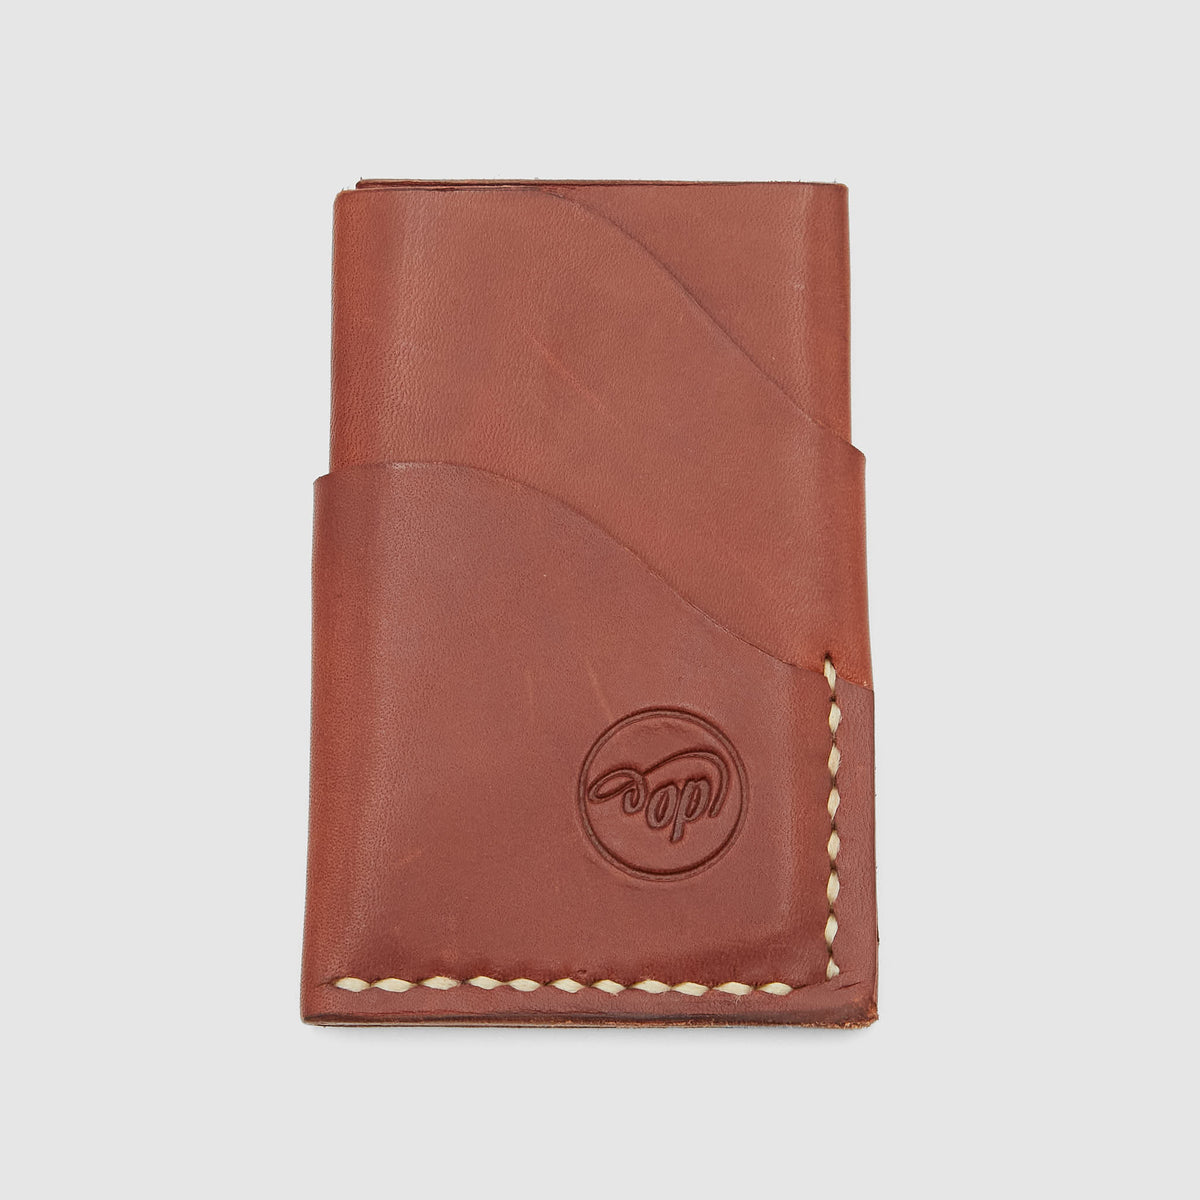 Oldpassion Leather Card Holder